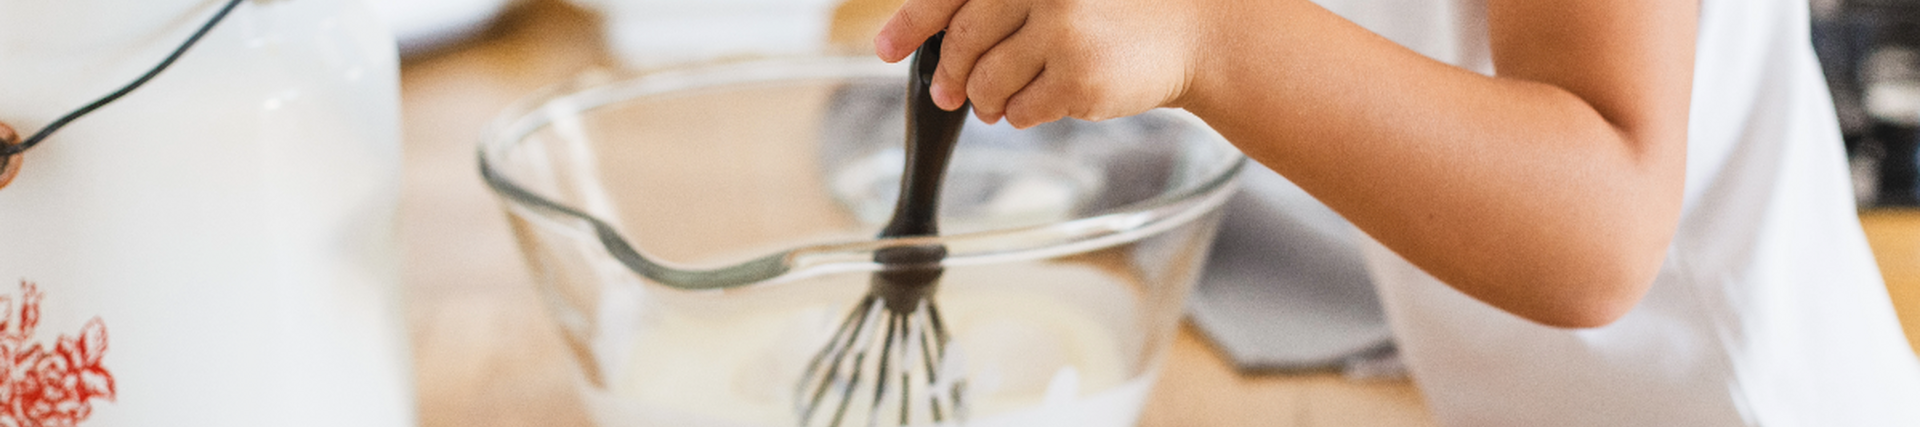 A mixing bowl with white mix and a whisk in it being held by a small child.